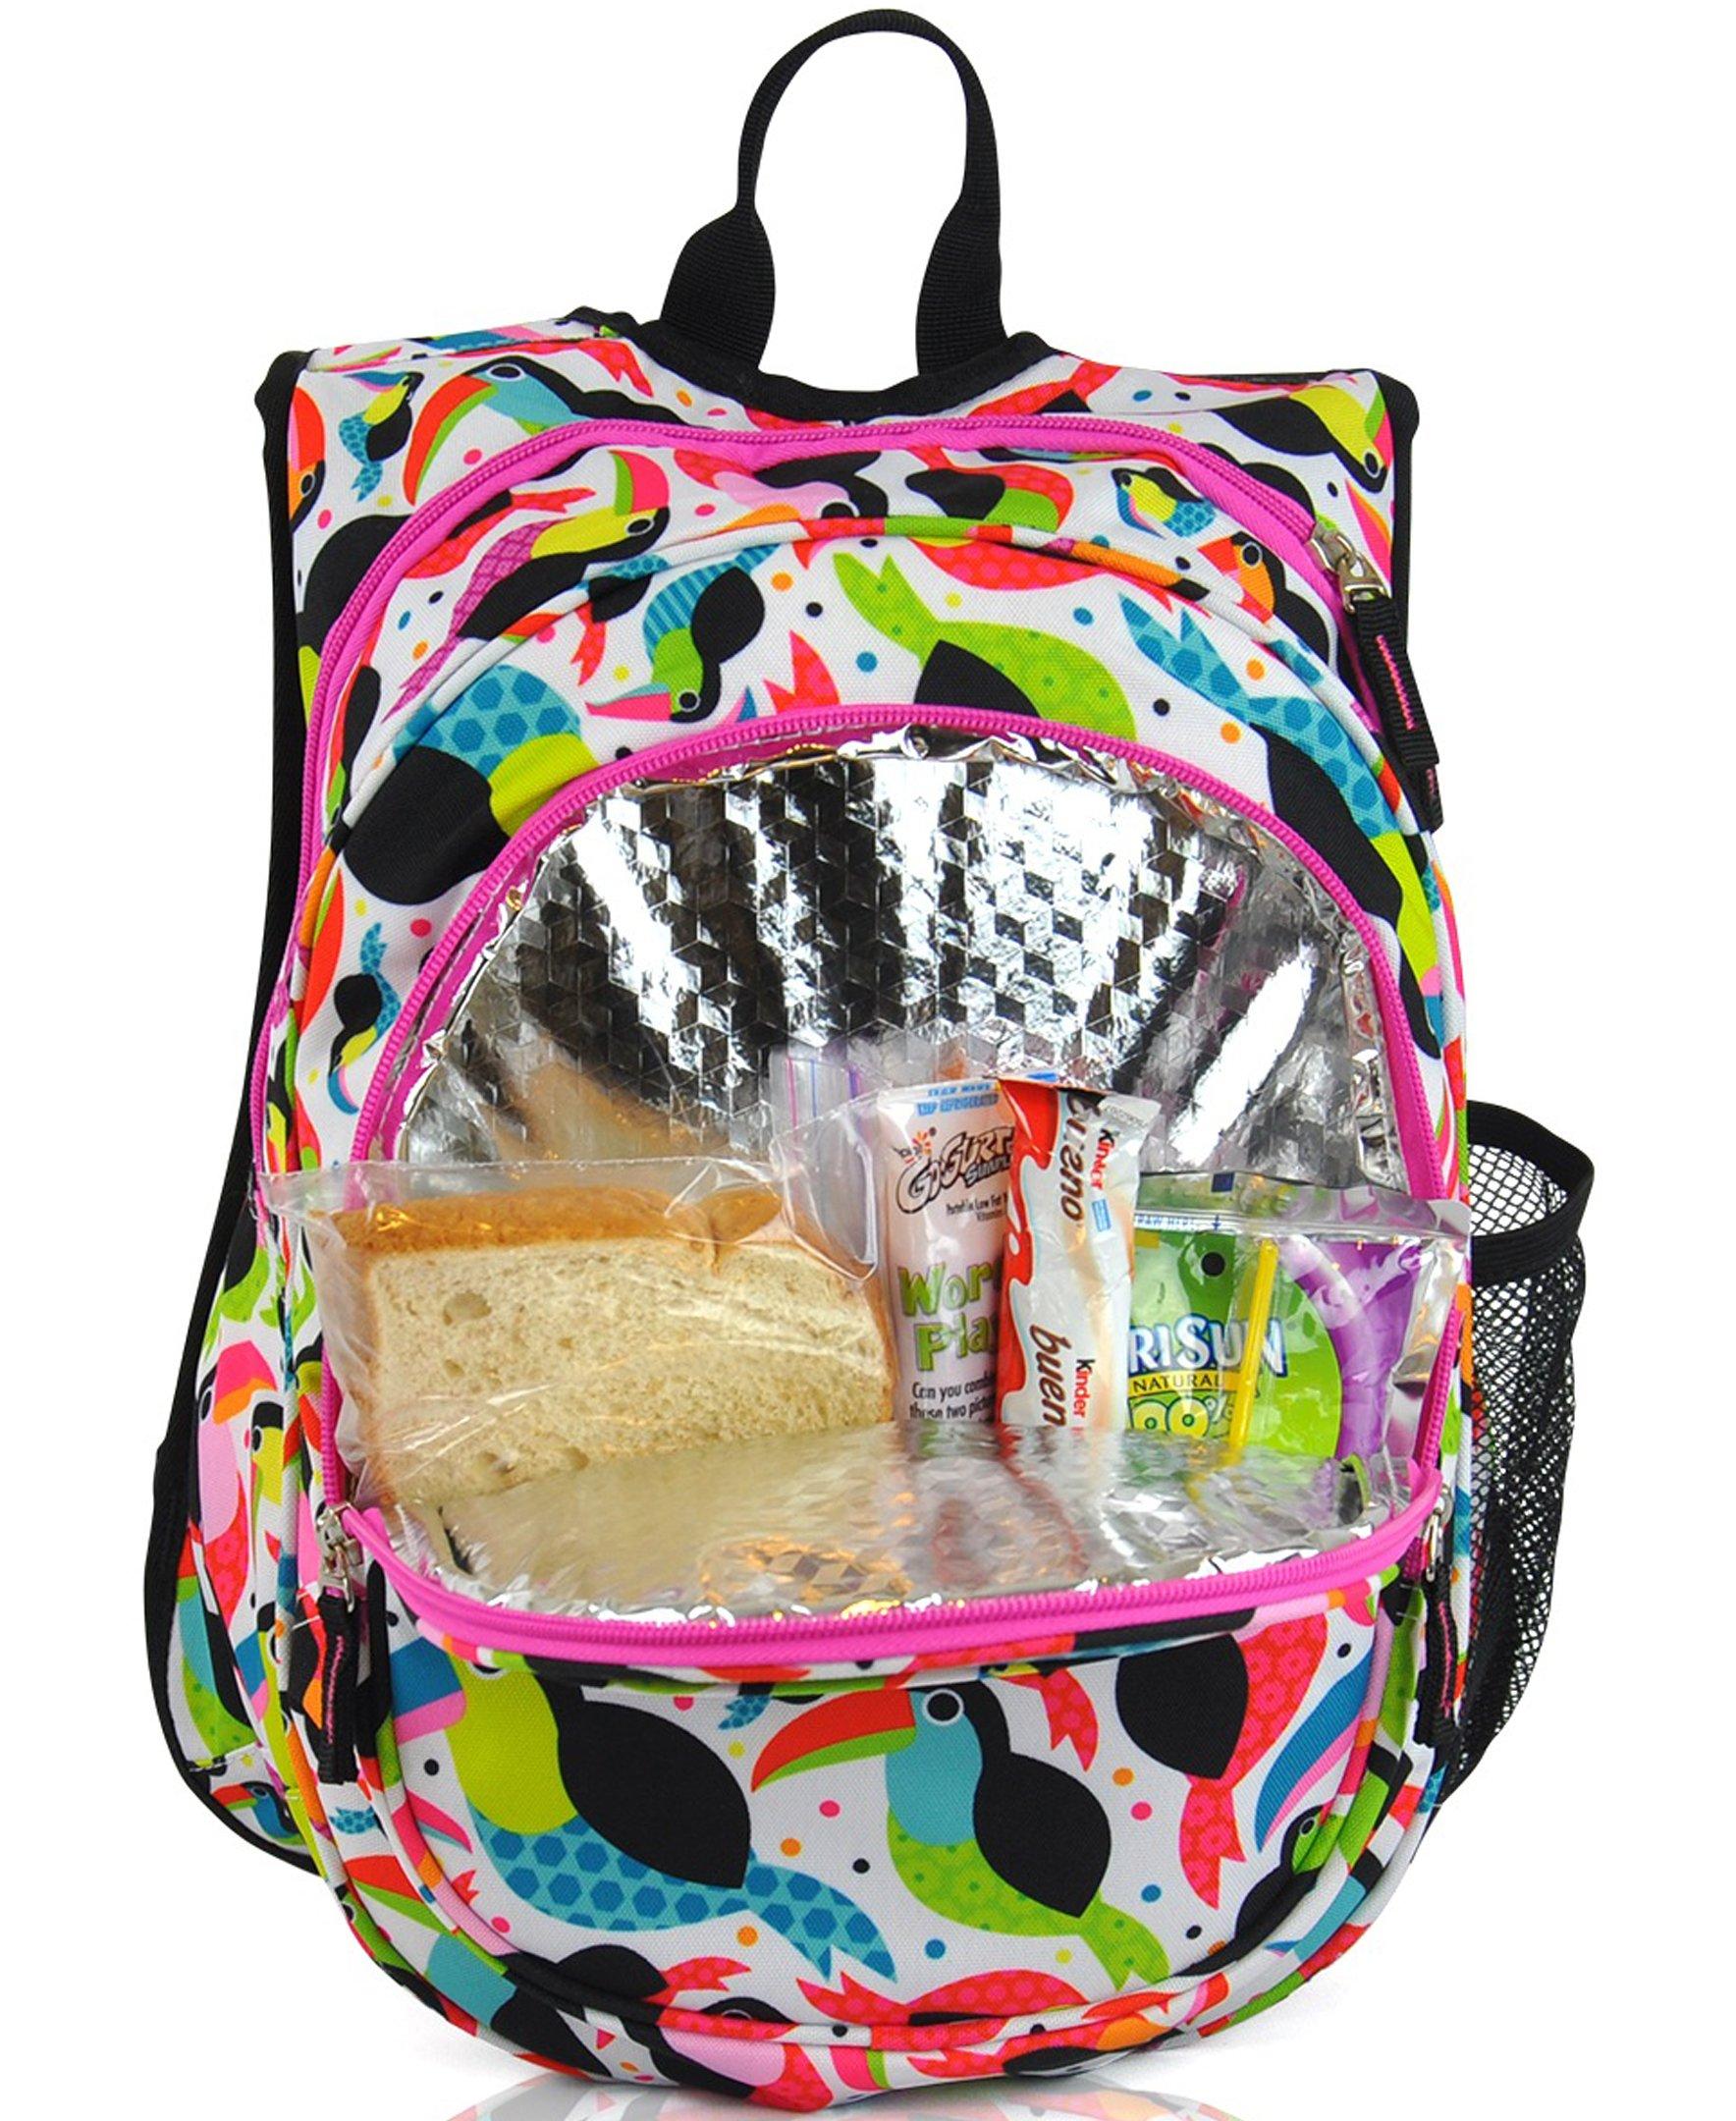 O3KCBP023 Obersee Mini Preschool All-in-One Backpack for Toddlers and Kids with integrated Insulated Cooler | Toucan - image 3 of 4